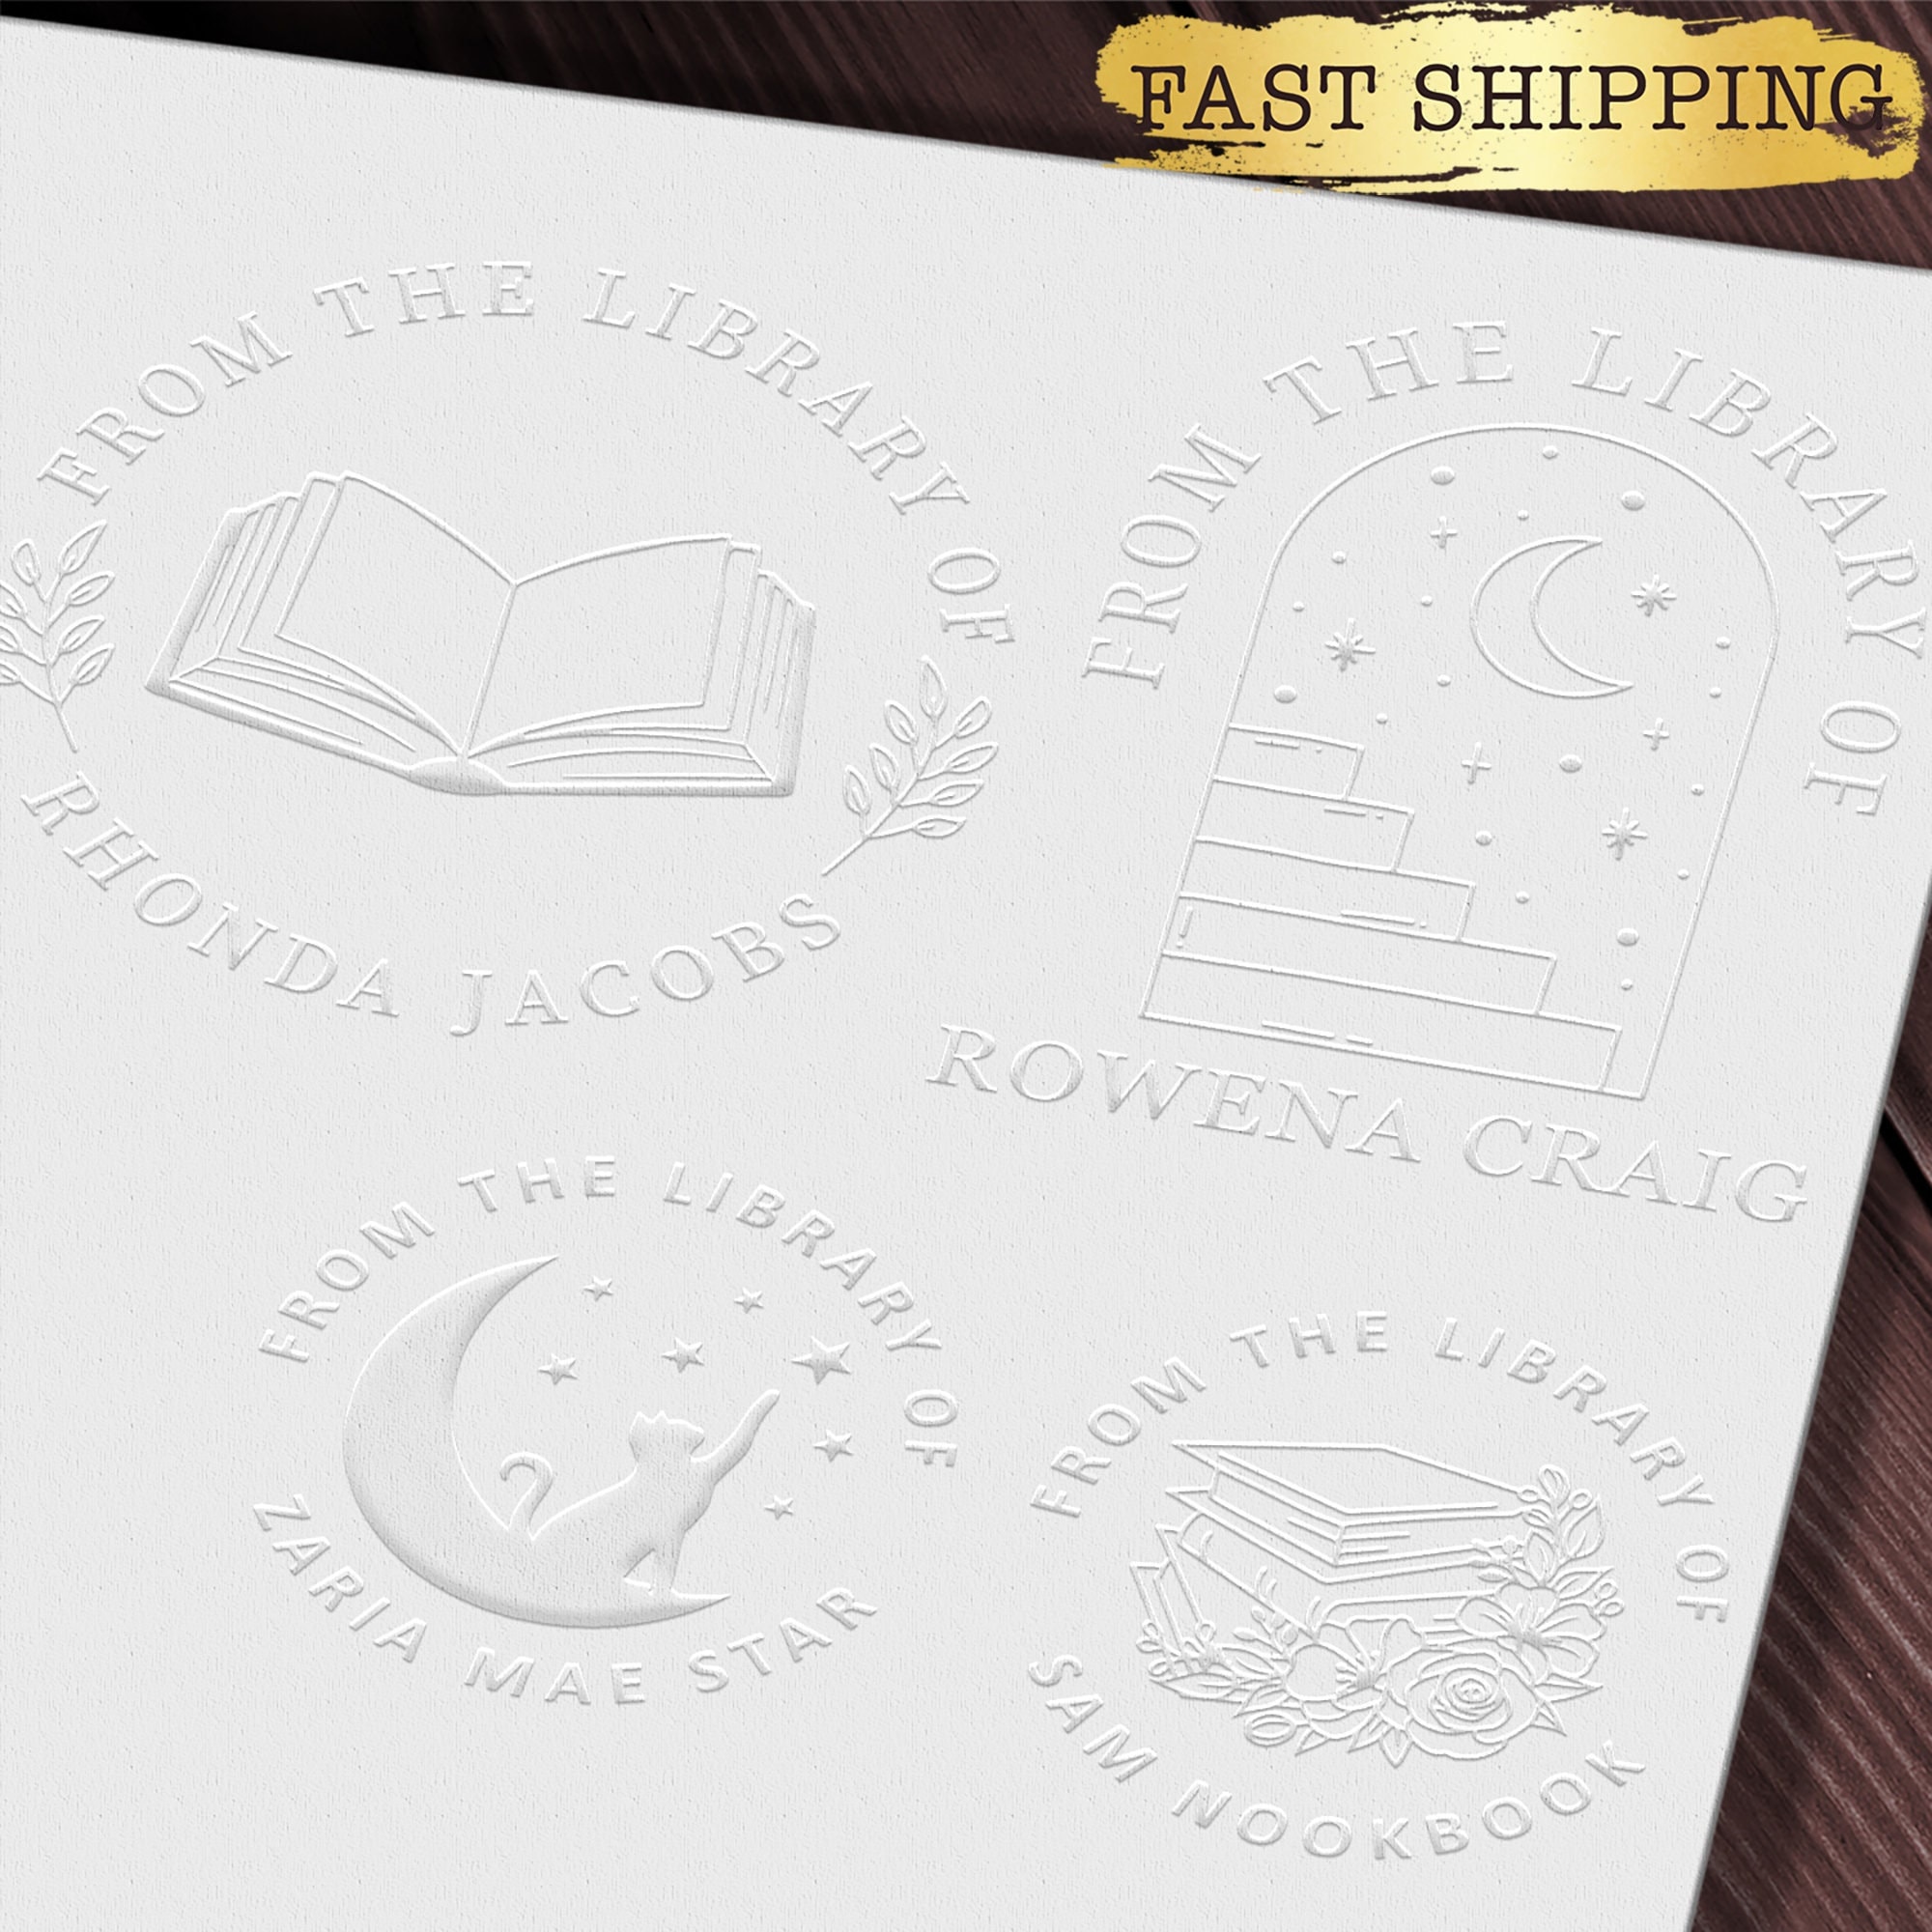 Book Stack Stamp, a Rubber Stamp for your Bookish Reading Journal